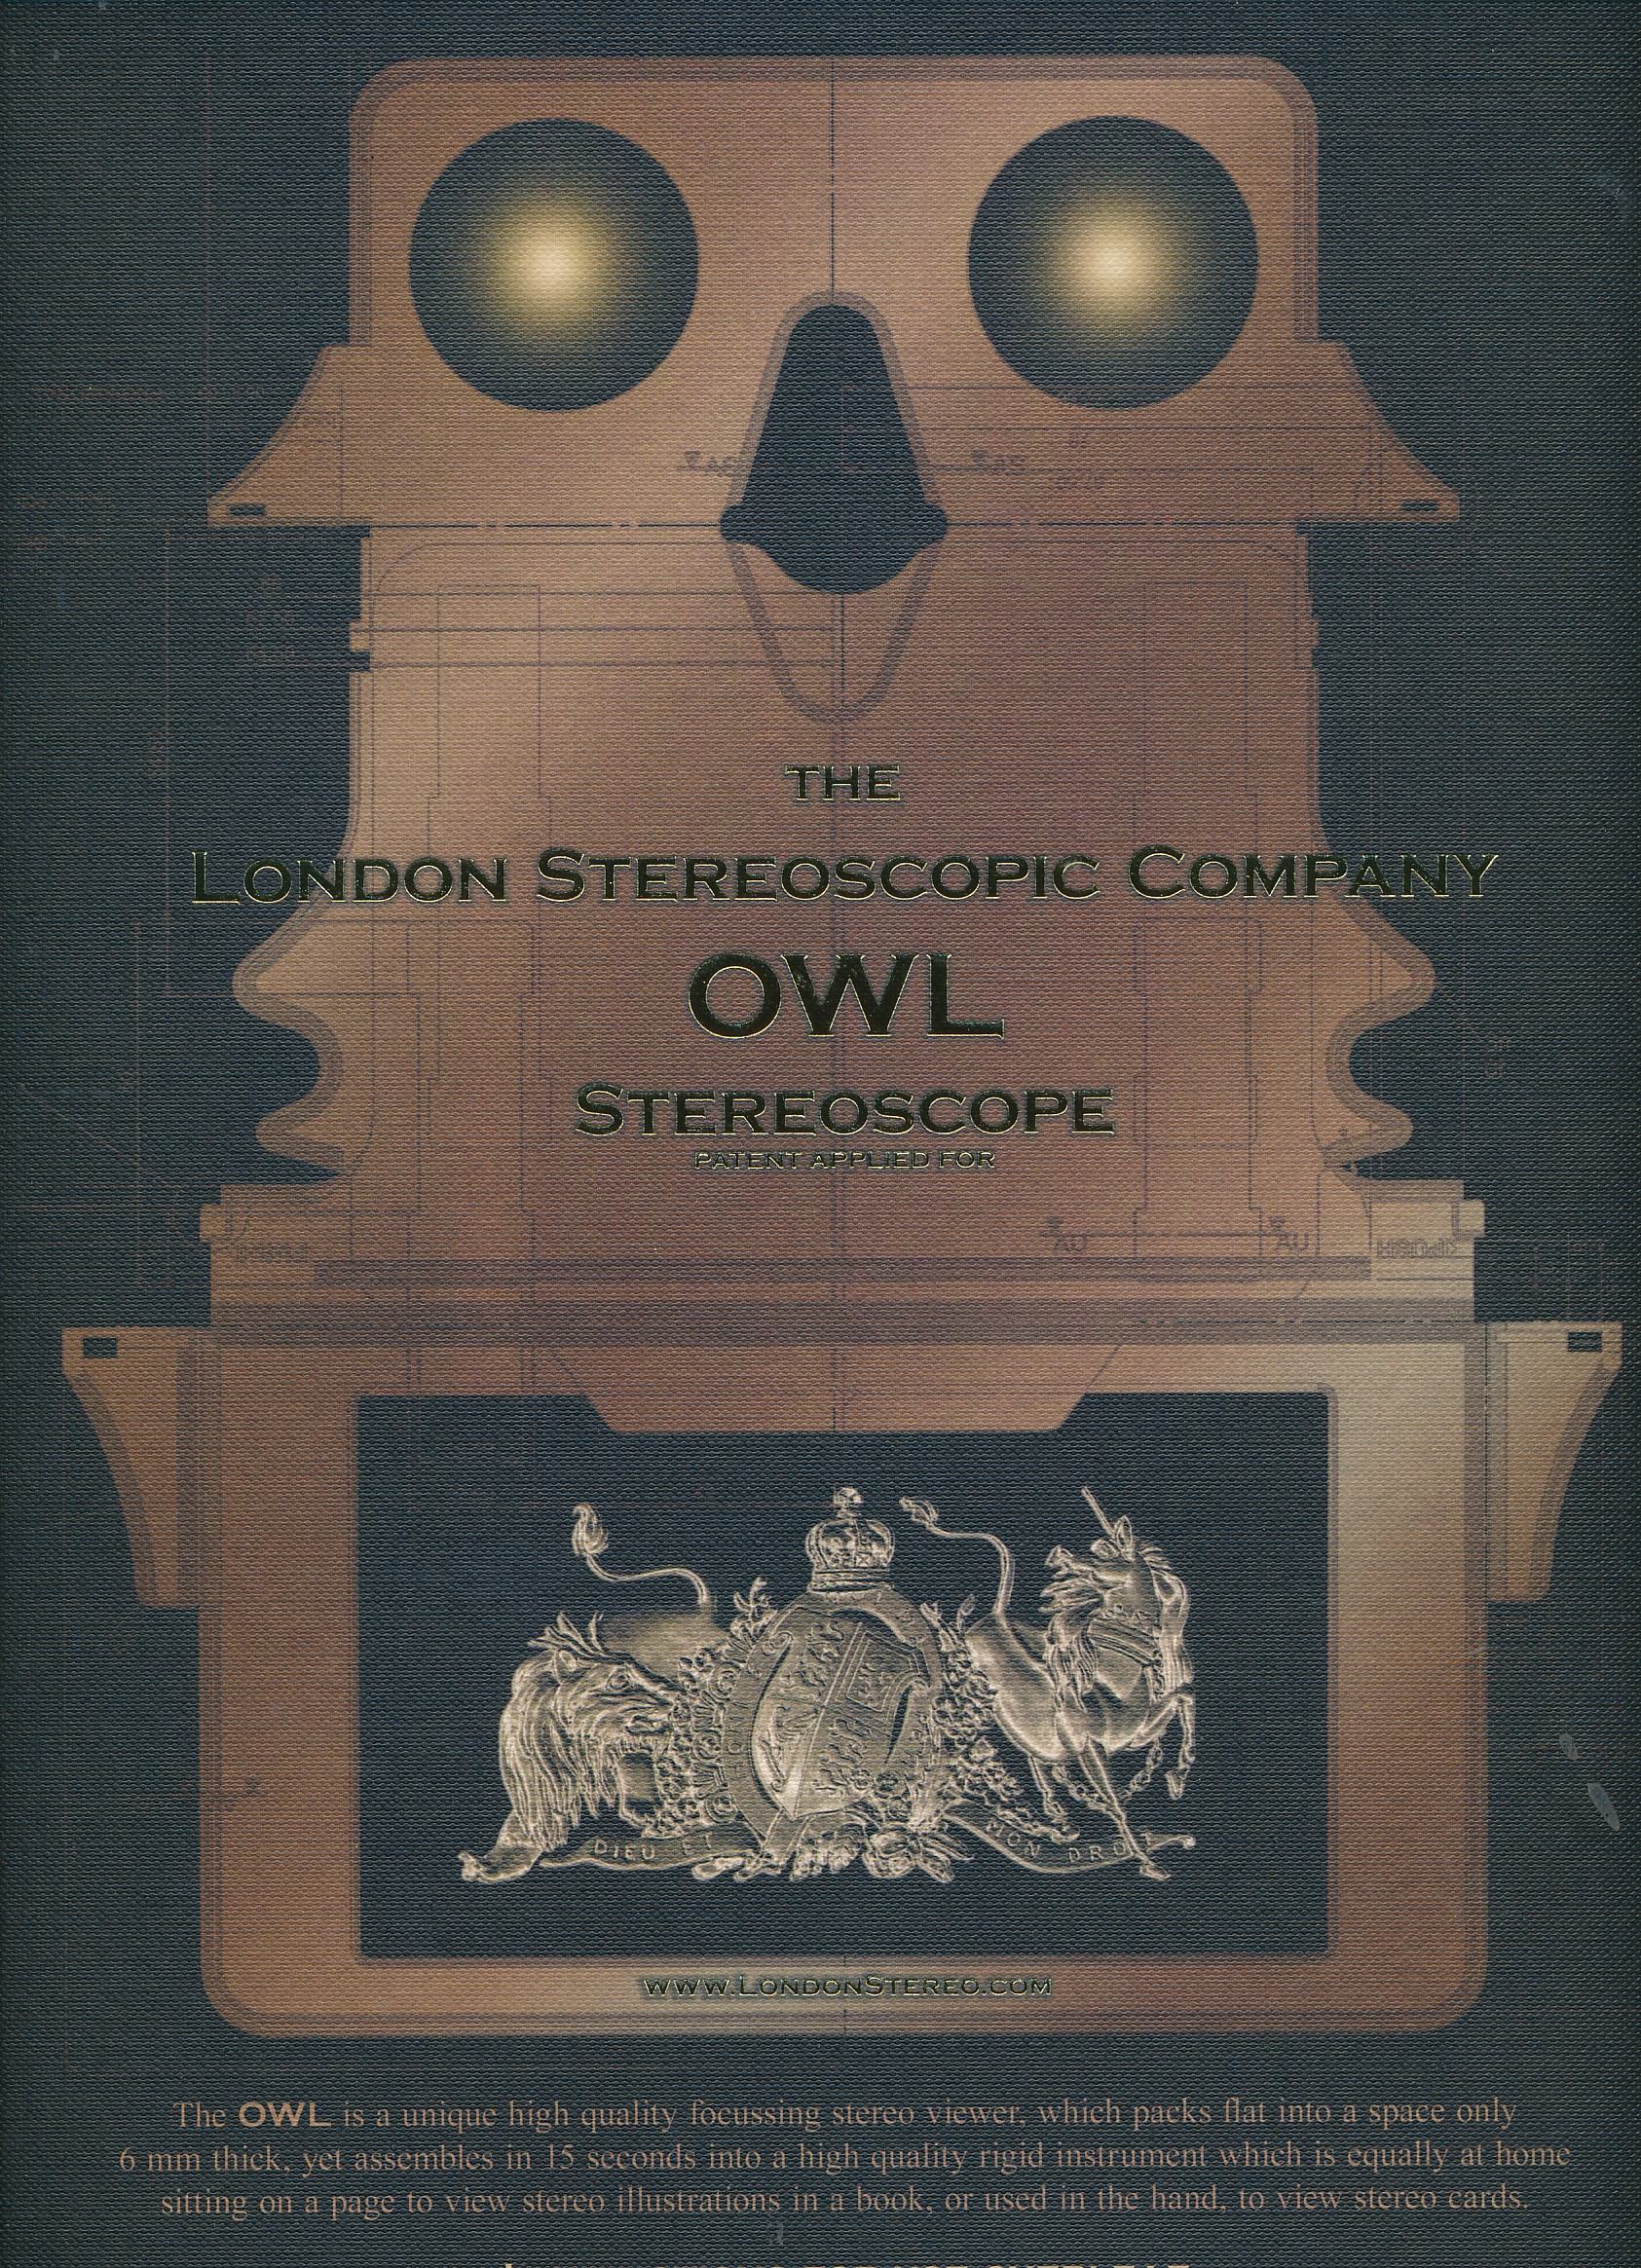 The Poor Man's Picture Gallery. Stereoscopy Versus Paintings in the Victorian Era. [Complete with OWL stereoscope]